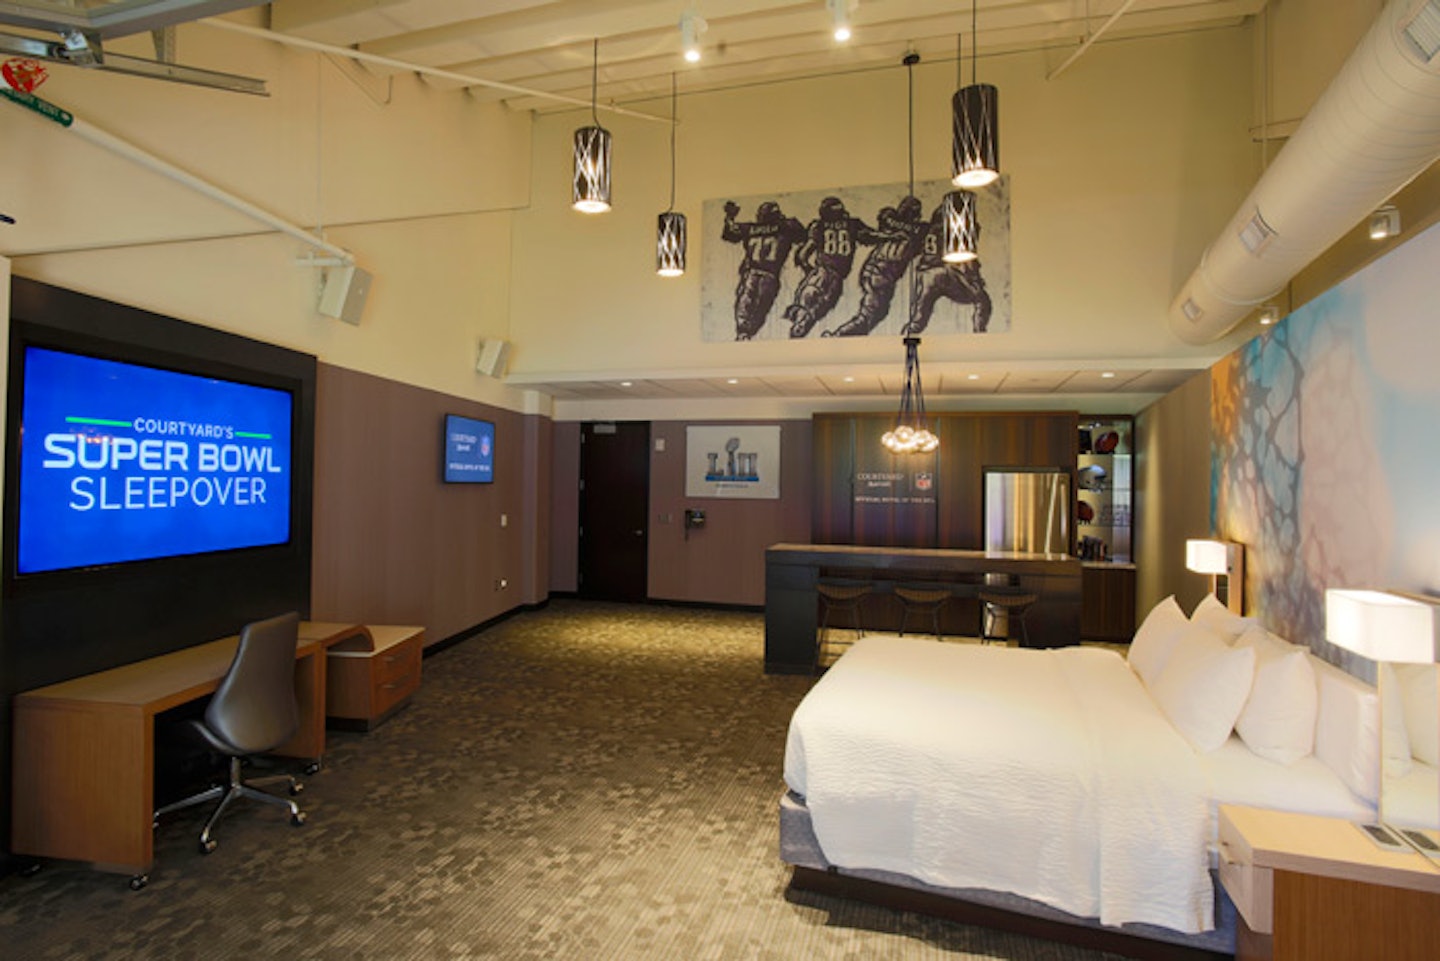 See How This Hotel Built a Room on the Field of Super Bowl LII BizBash